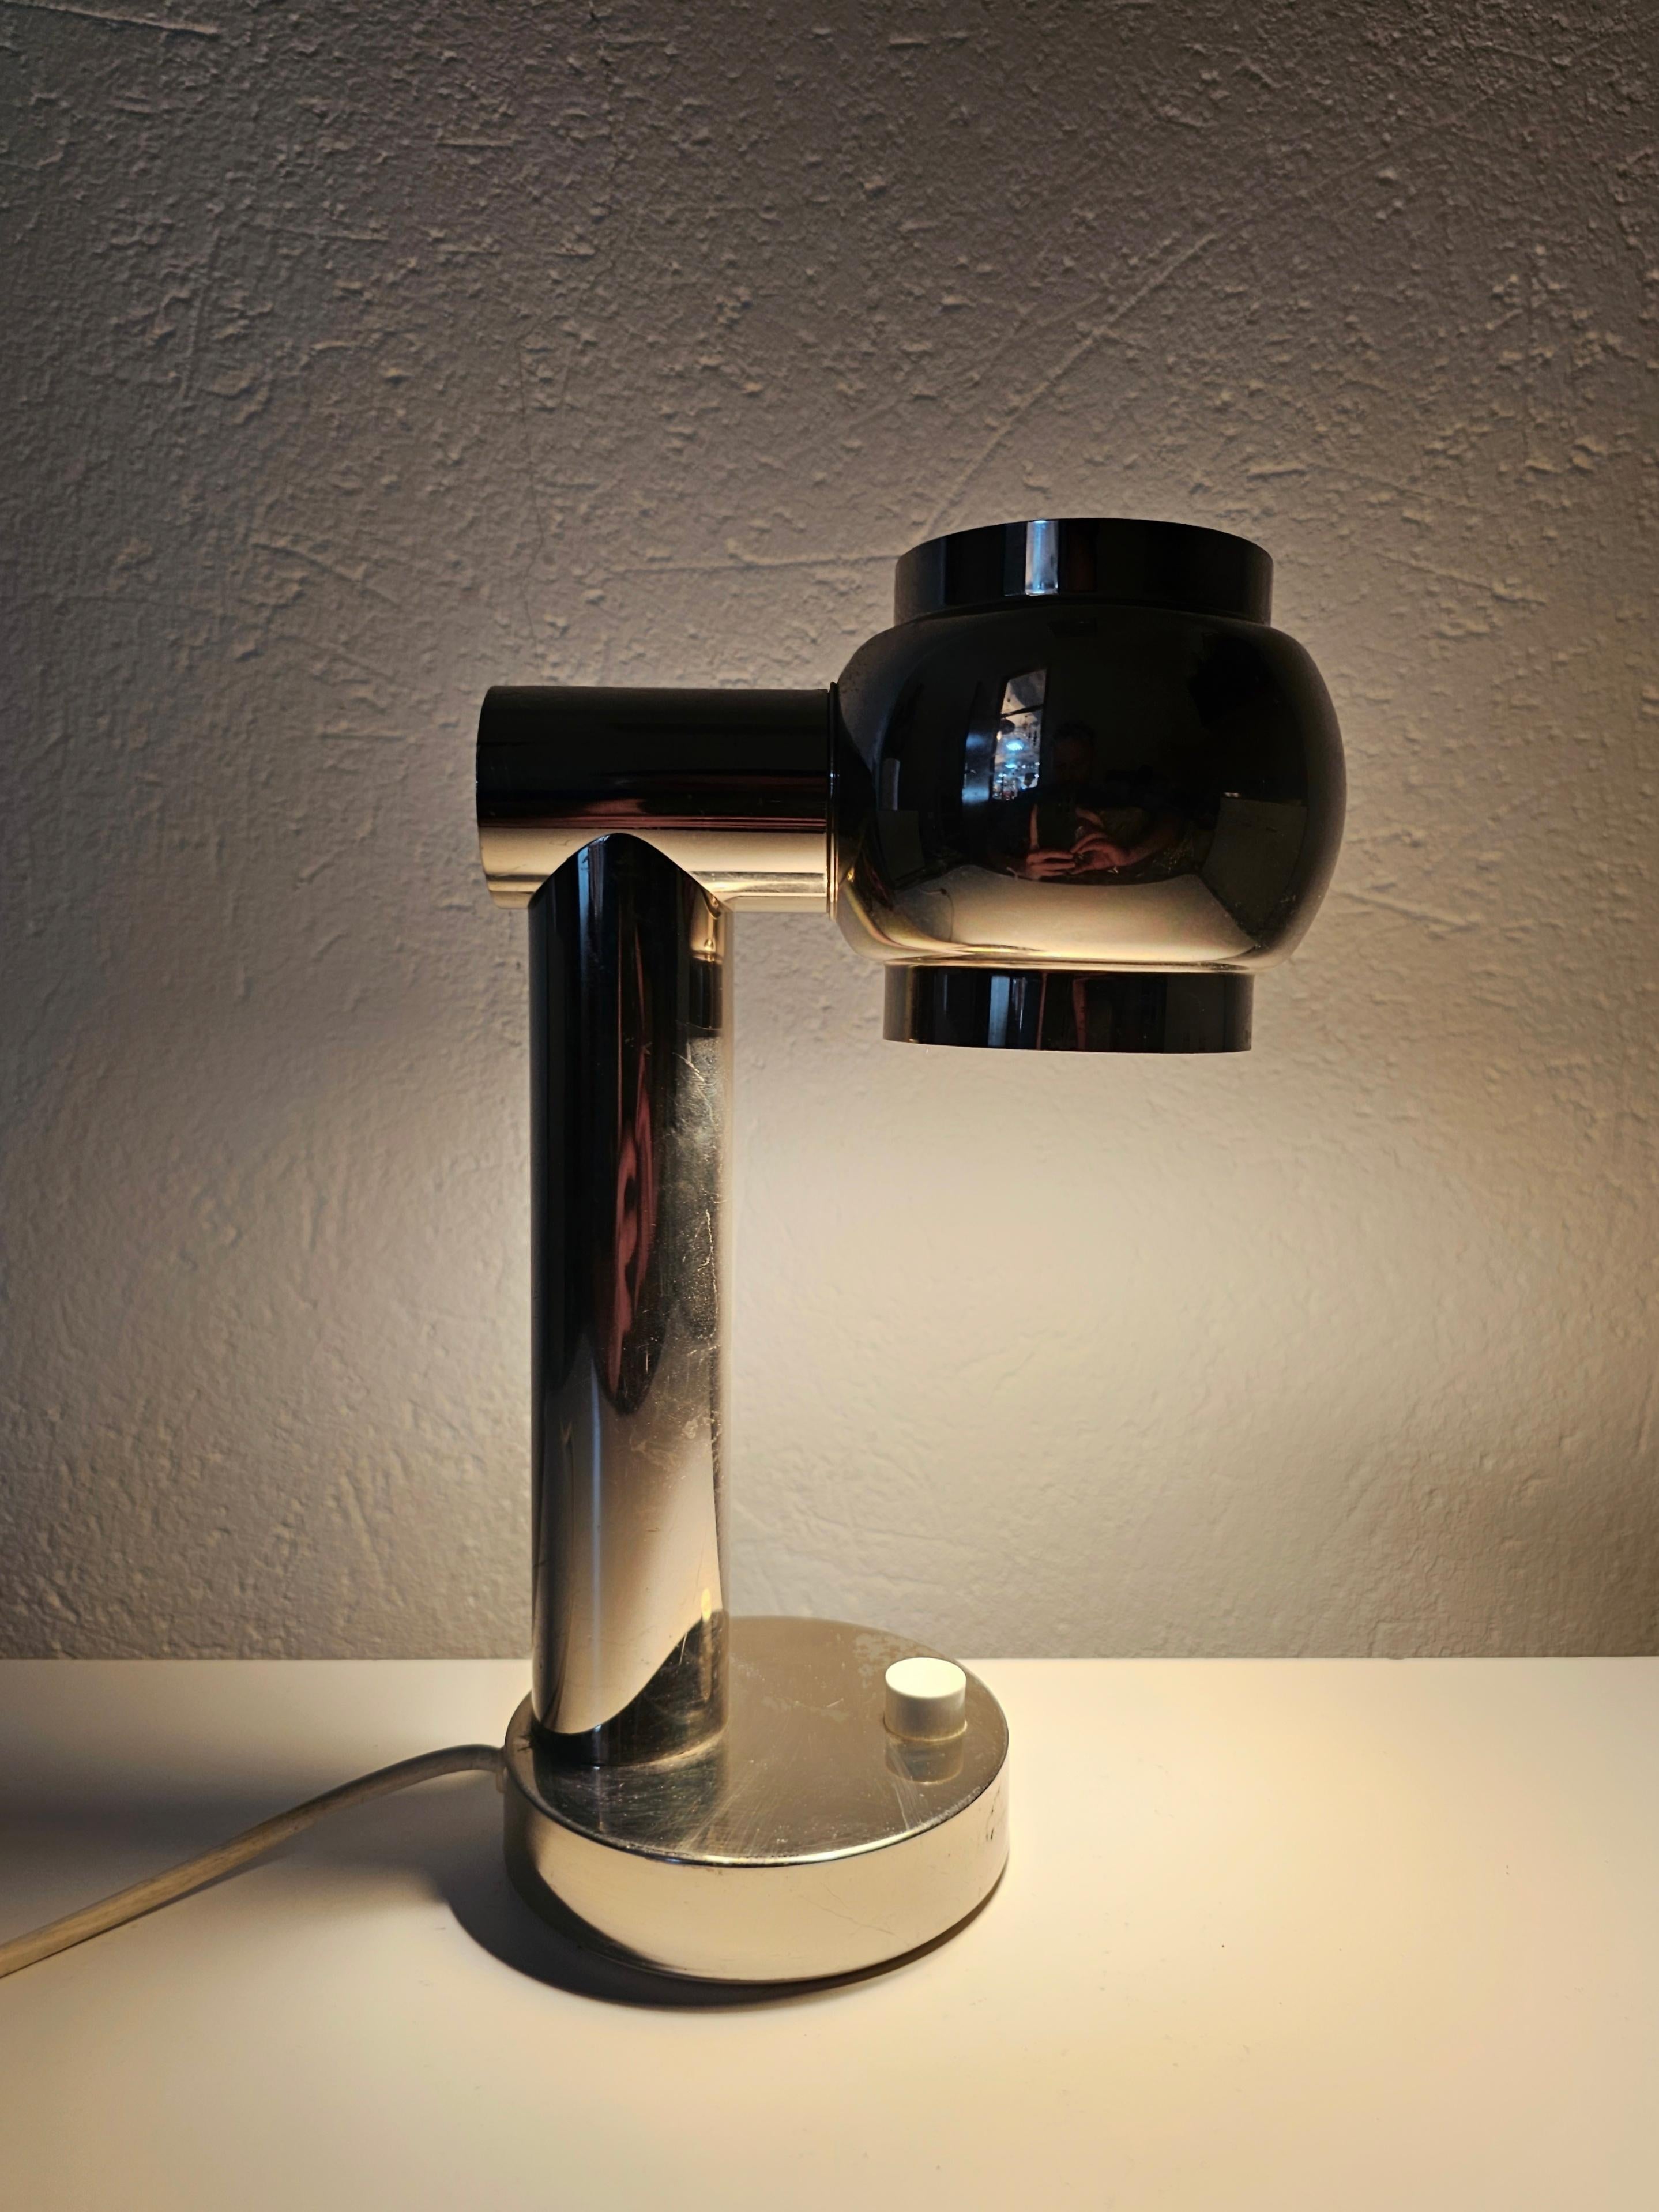 In this listing you will find a gorgeous little Space Age table lamp done entirely in chrome. It features tubular form with a revolving head that allows you to point light in any direction. Made in Italy in 1970s. 

Thr lamp has European plug which